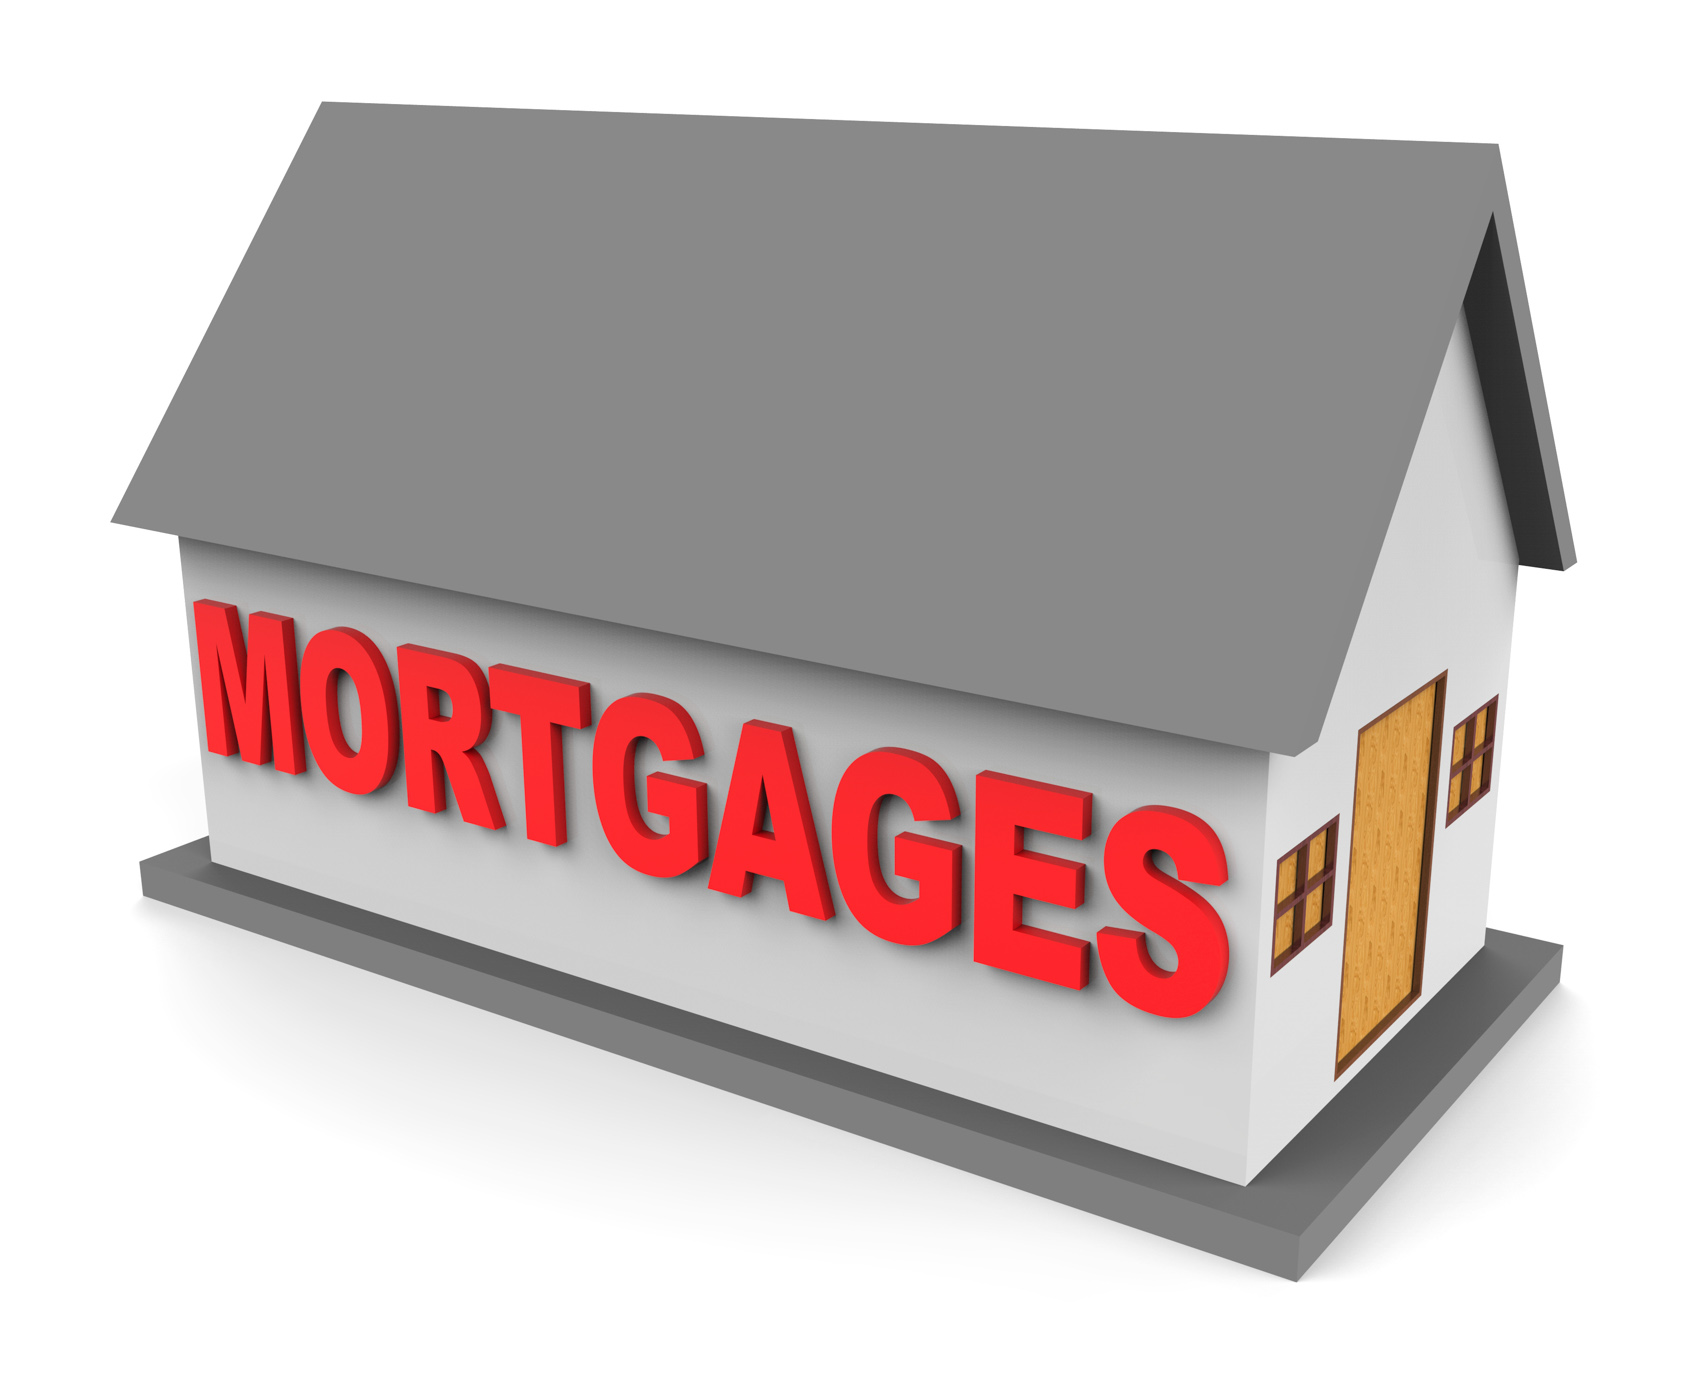 House mortgages represents housing loan and buying 3d rendering photo